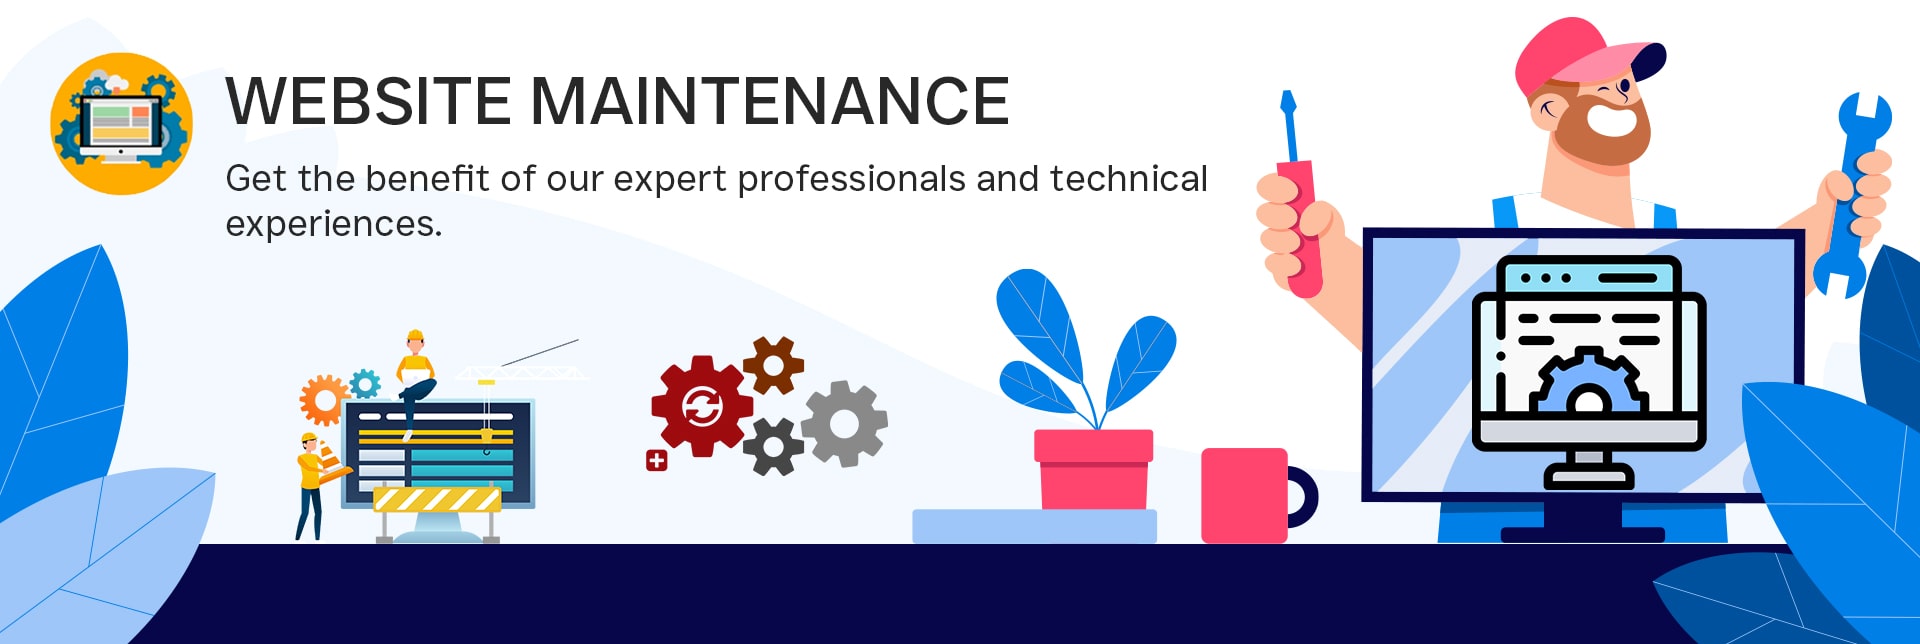 GET WEBSITE MAINTENANCE SERVICE FROM MOST TRUSTED AGENCY INDIA